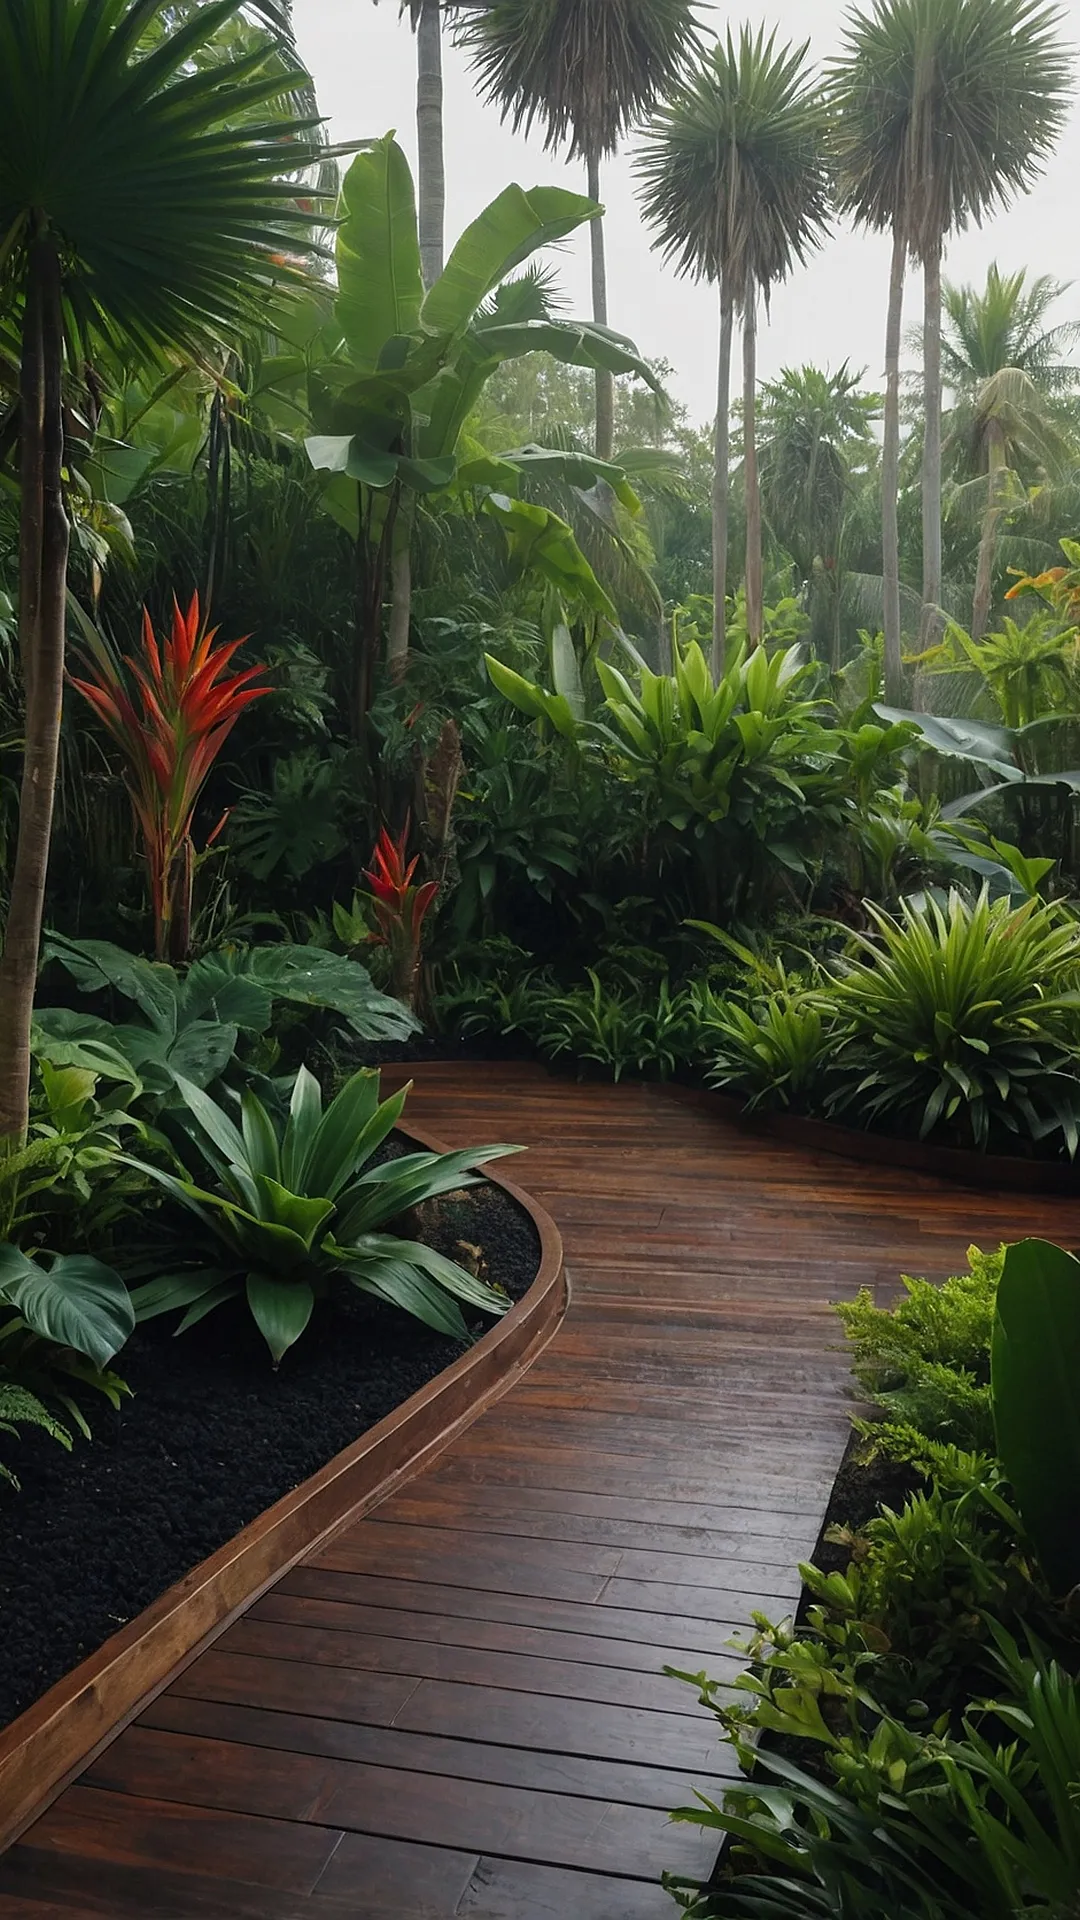 Tropical Blooms at the Entrance